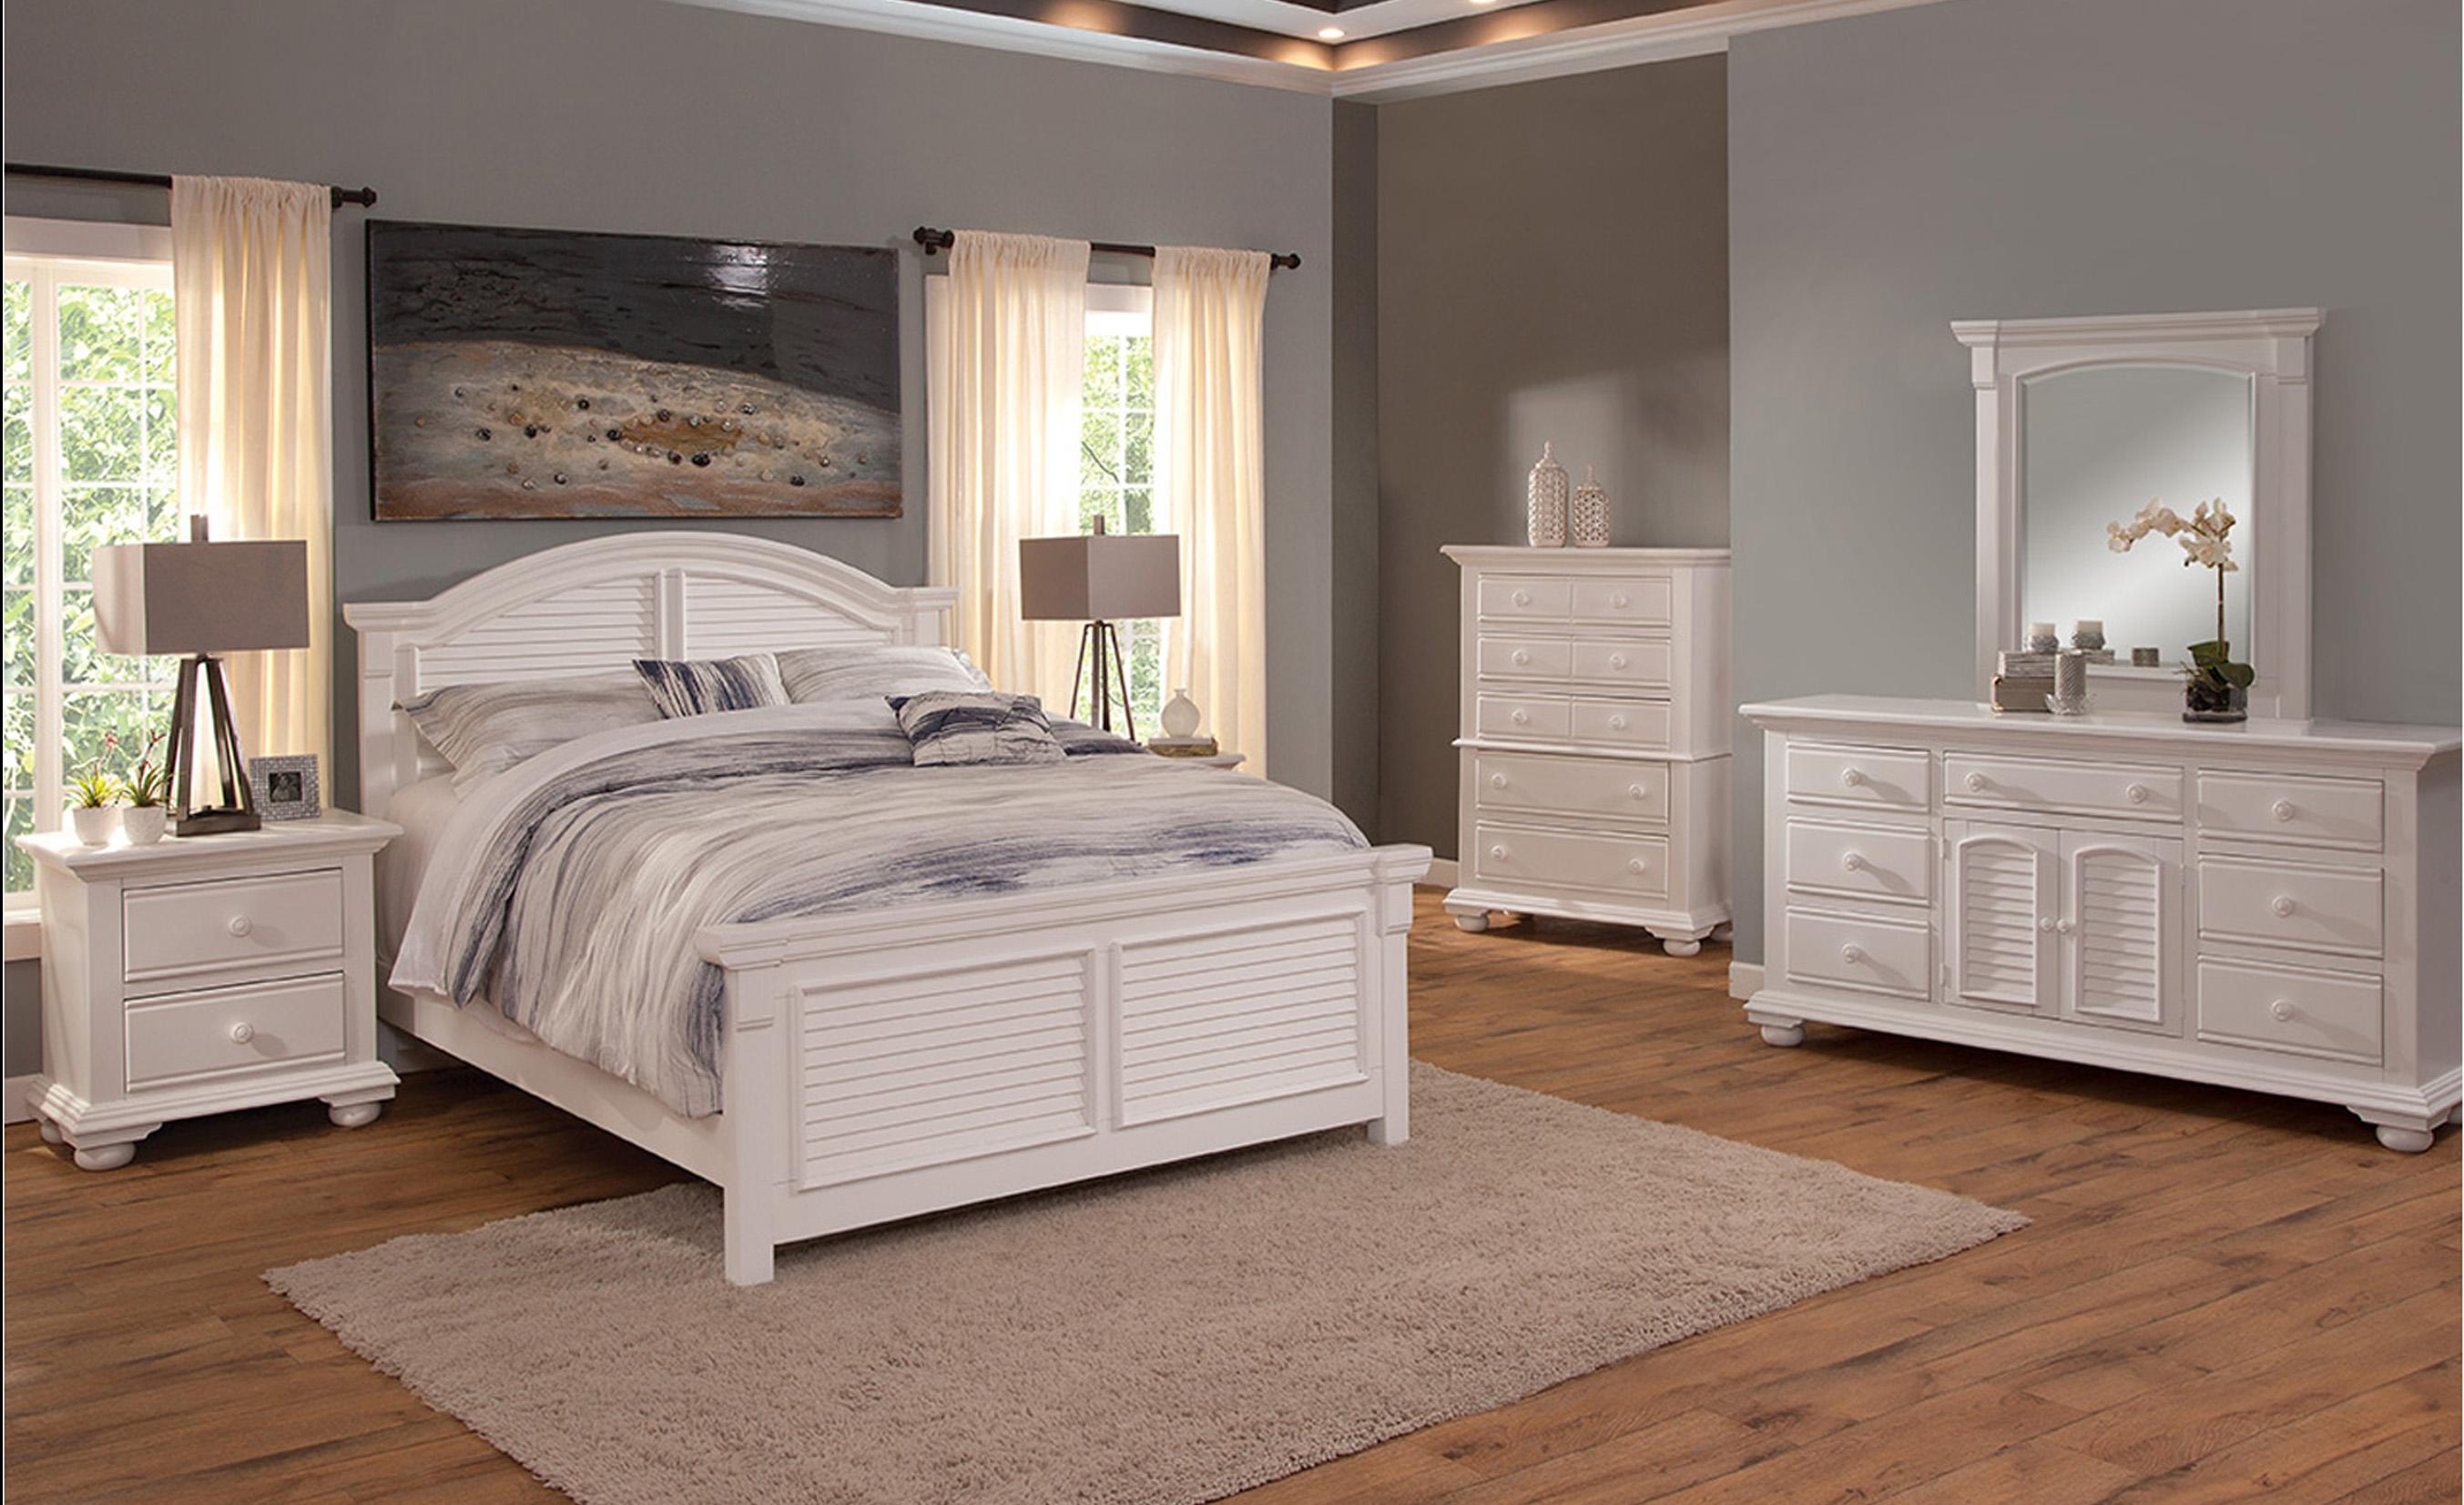 

        
American Woodcrafters COTTAGE 6510-66PAN Panel Bedroom Set White  891366039113
